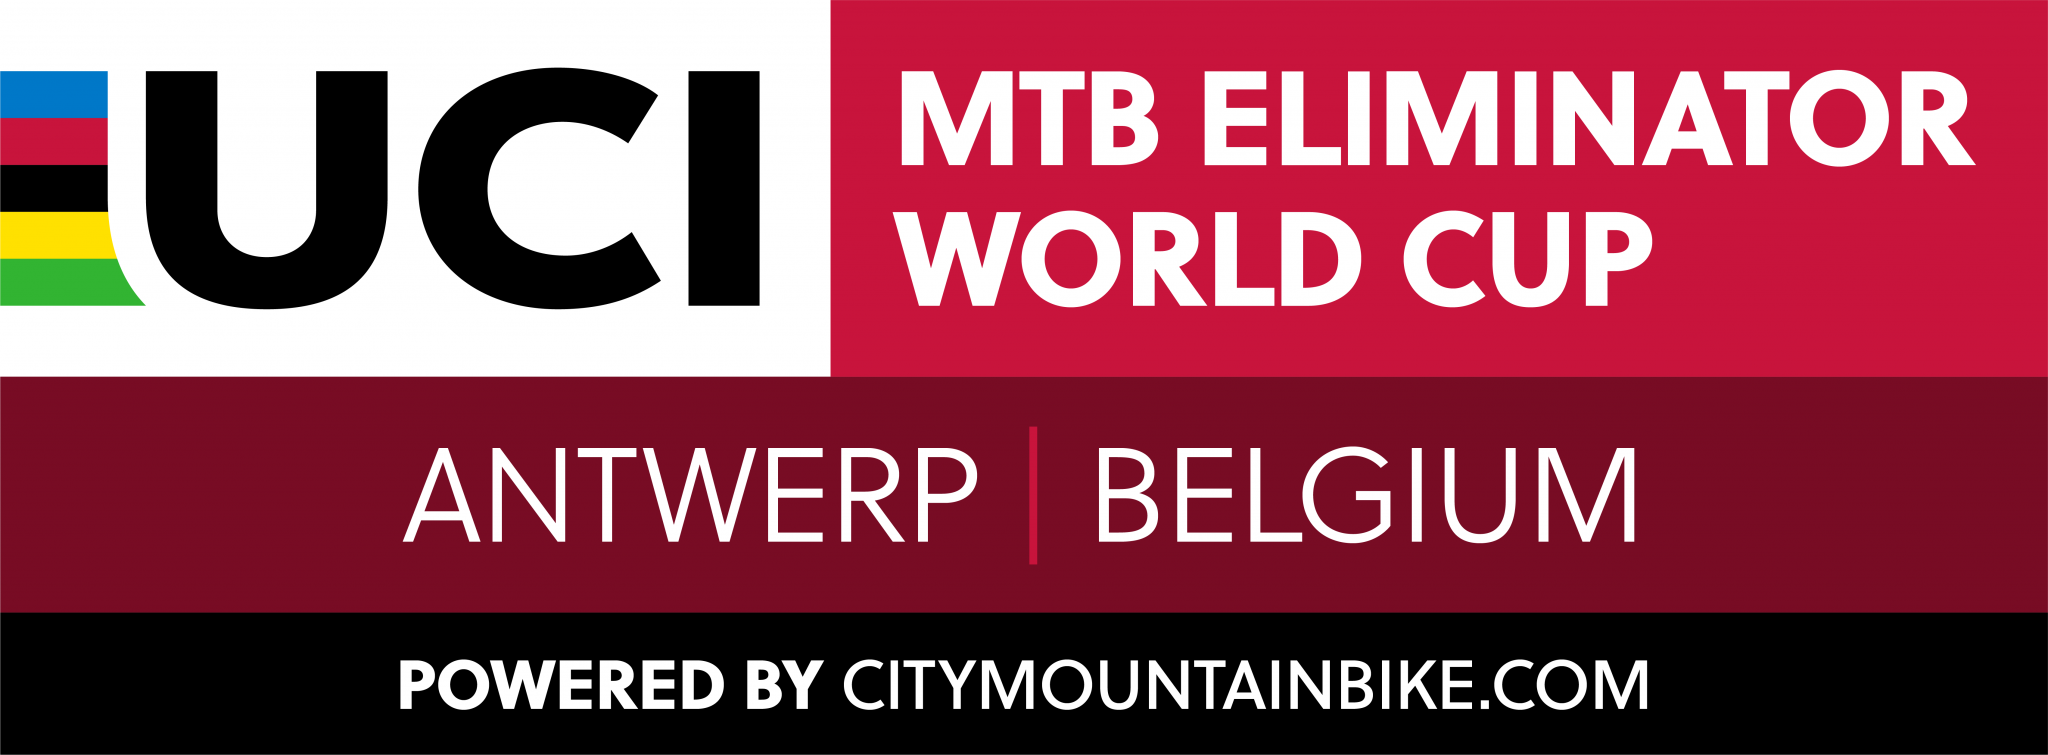 Mountain Bike Eliminator World Cup set to conclude in Antwerp